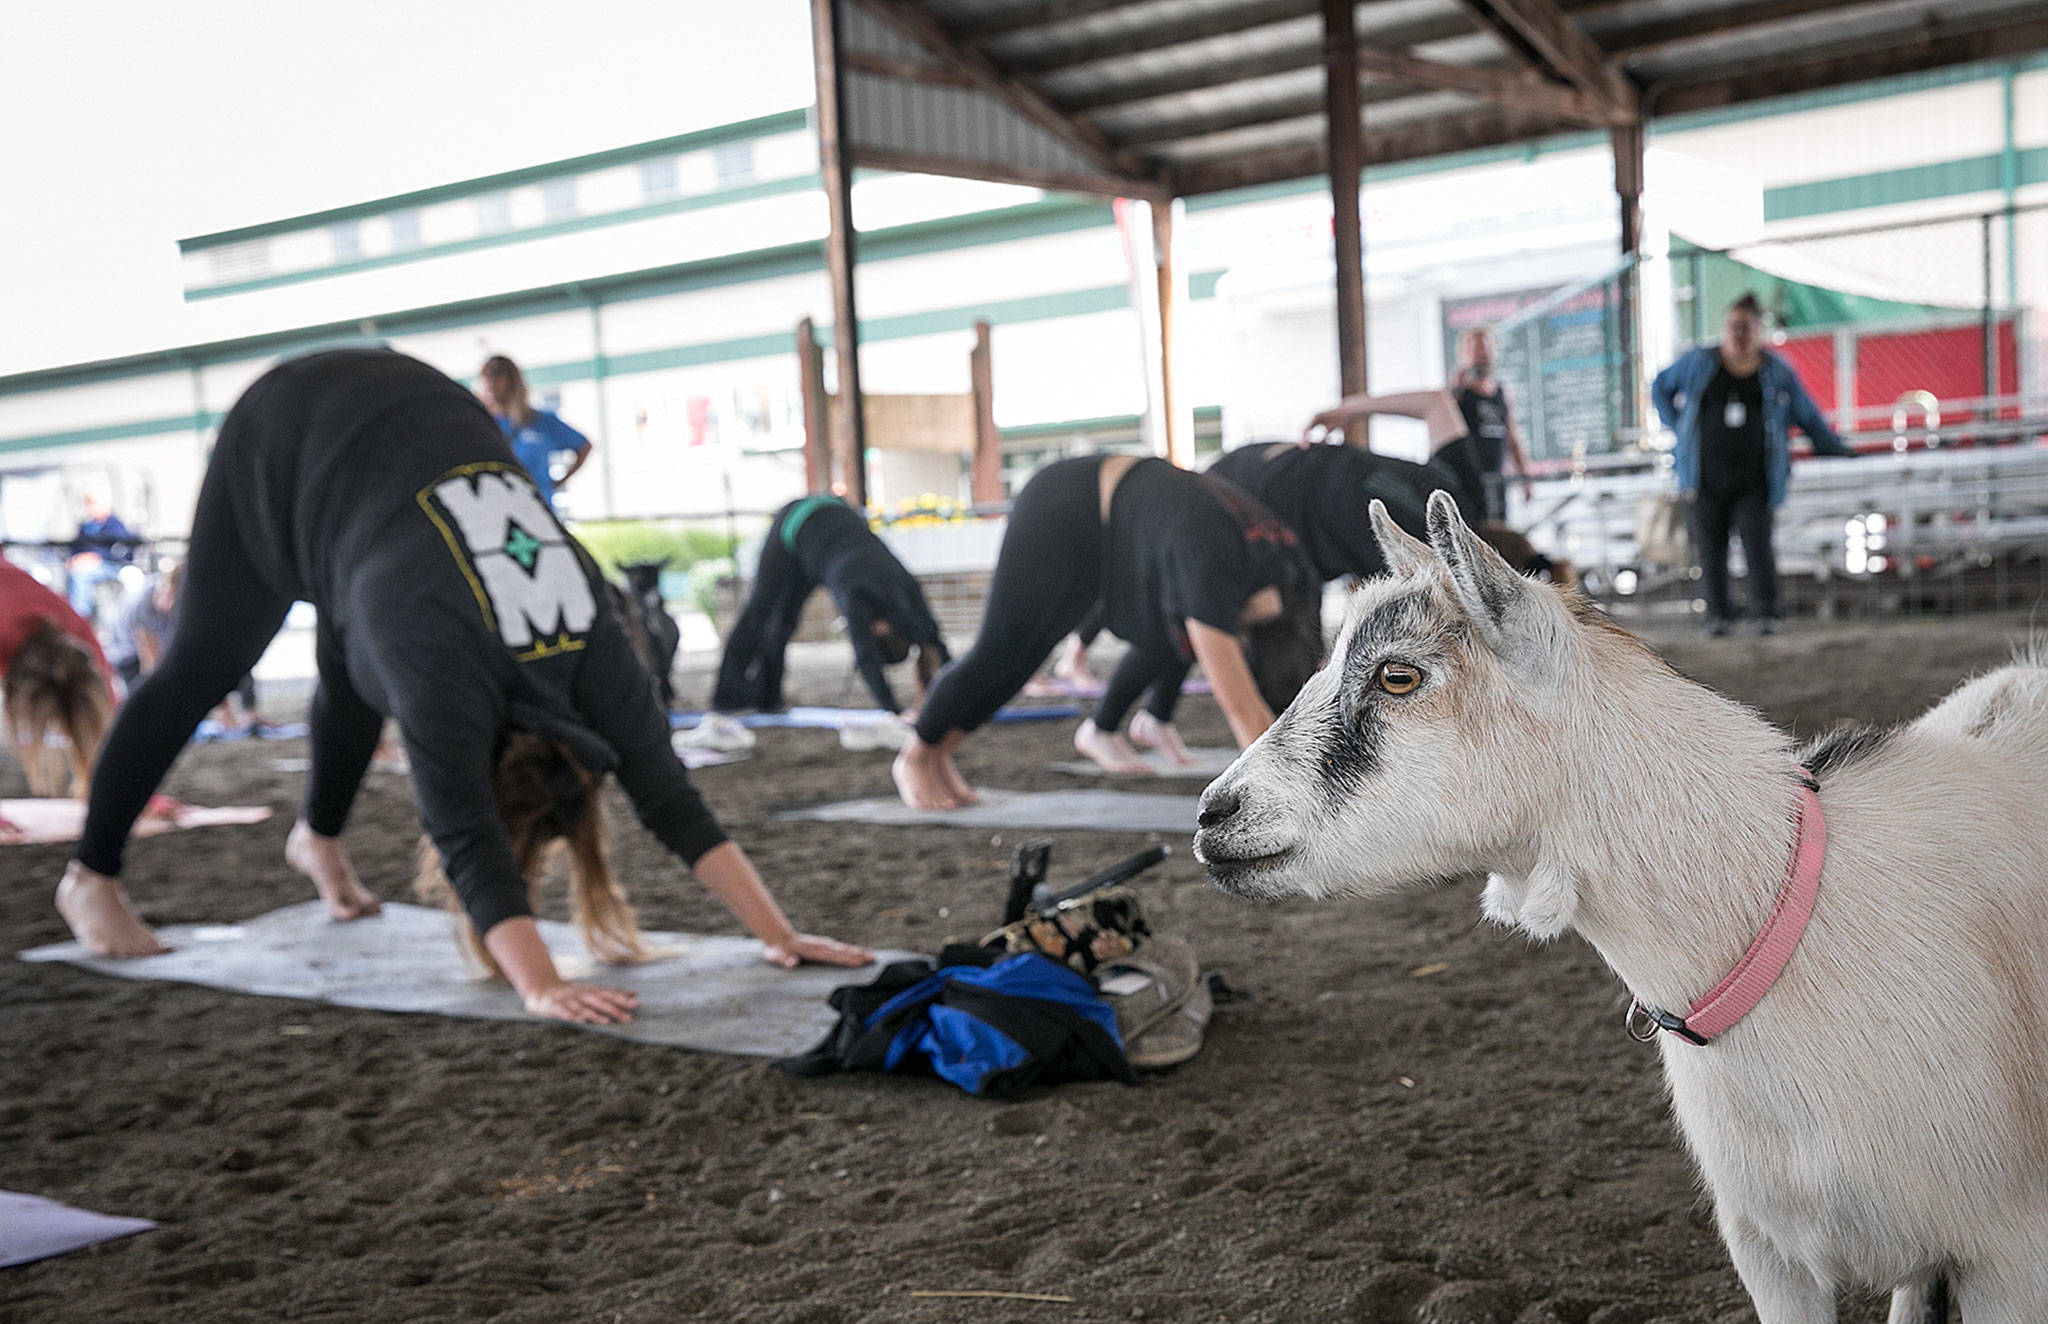 Goat yoga was a new event at the Evergreen State Fair this year. The Monroe-based Bliss Yoga Studio led the two sessions held last week. (Lizz Giordano / The Herald) Photo taken Aug. 29